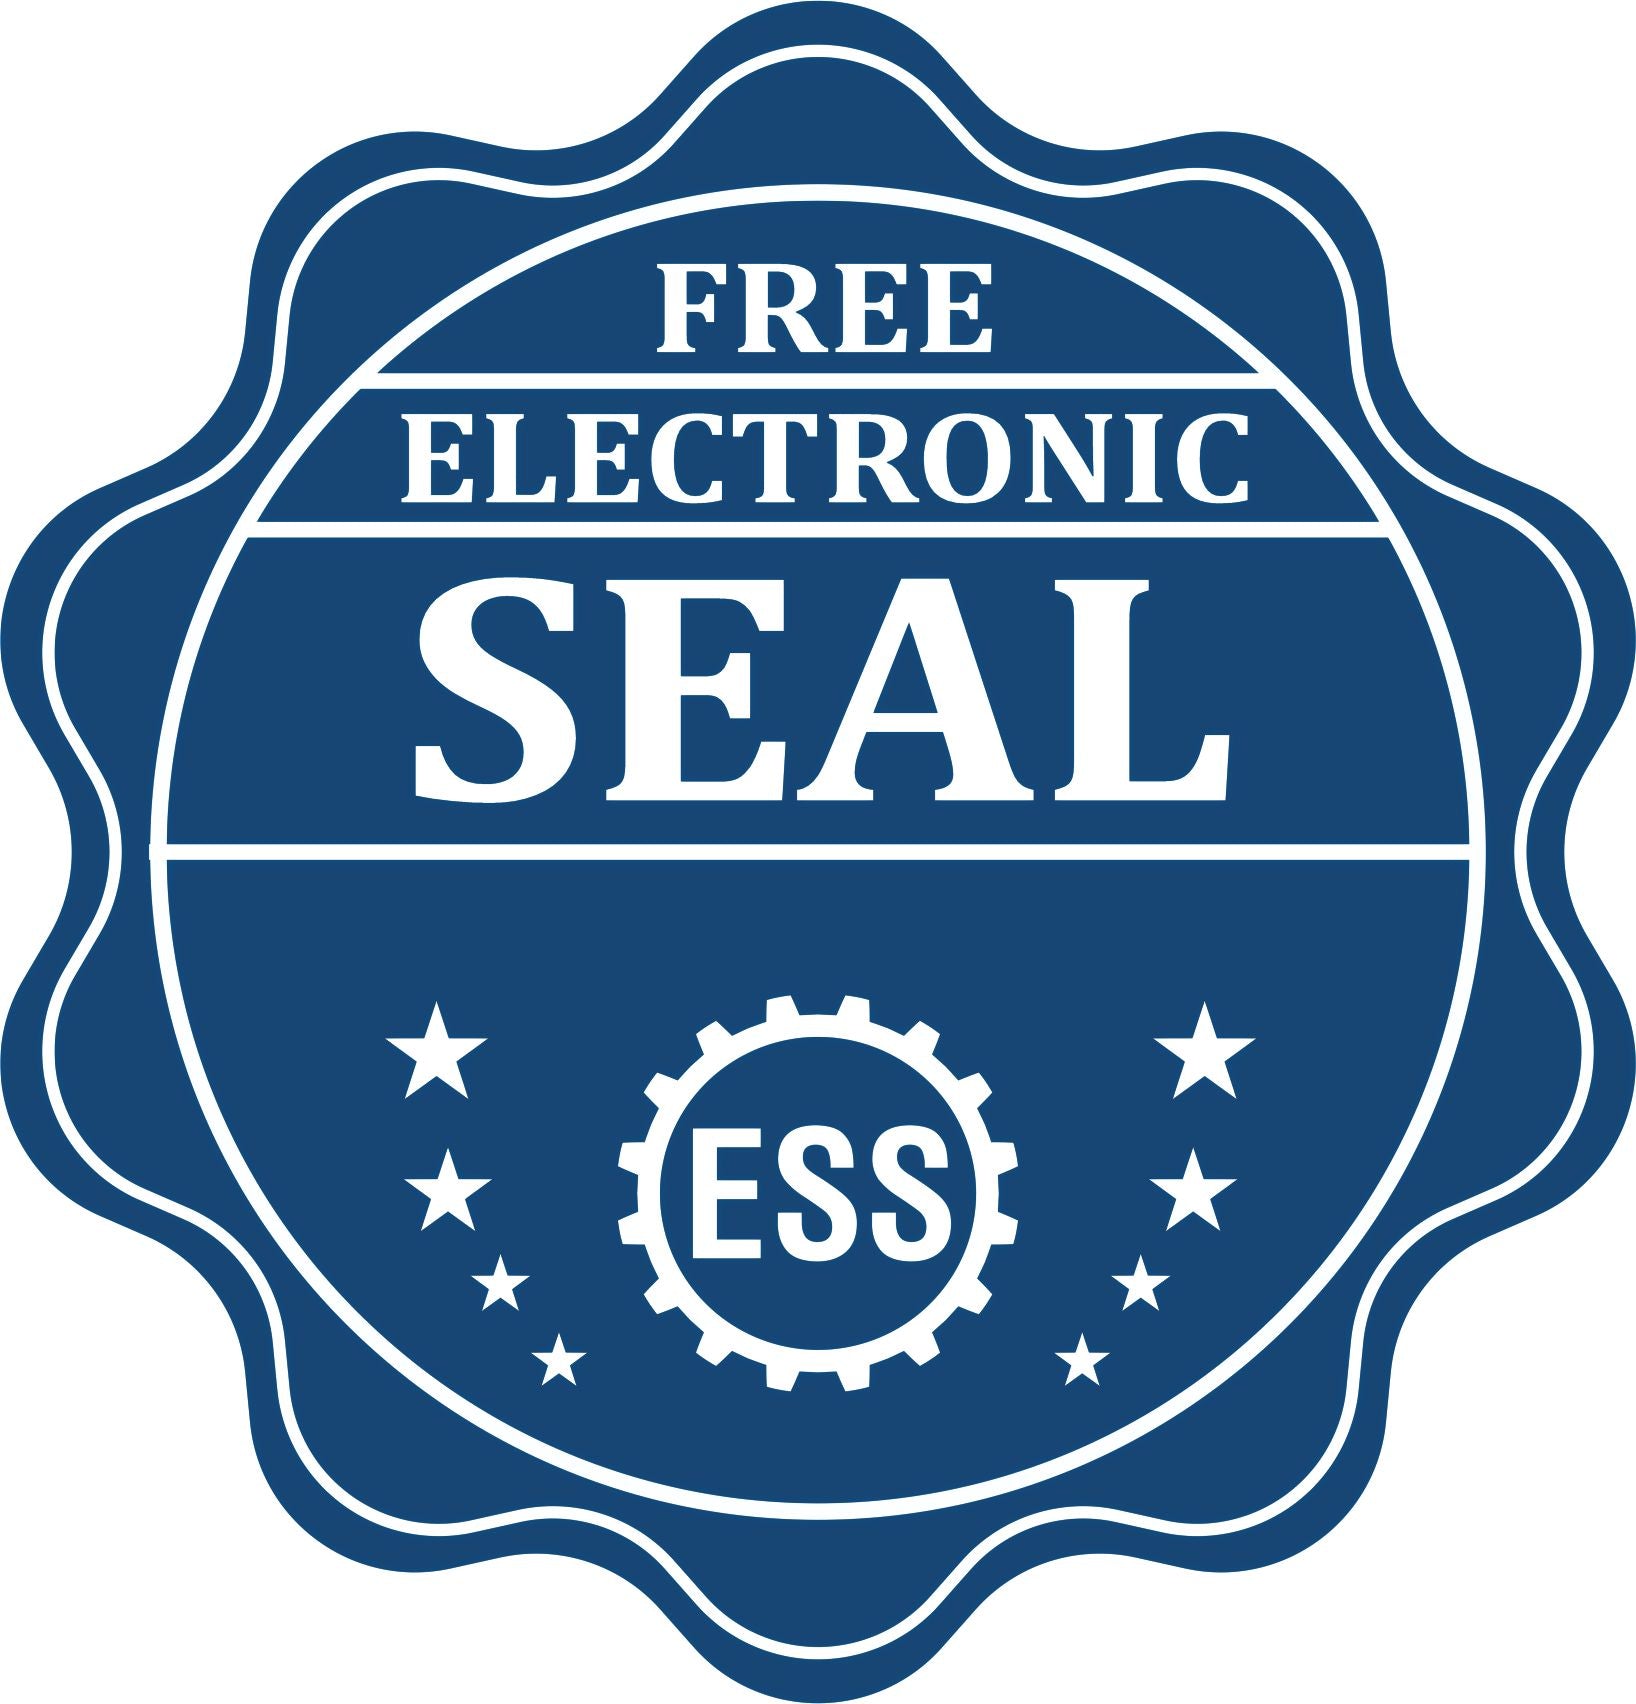 A badge showing a free electronic seal for the Texas Geologist Desk Seal with stars and the ESS gear on the emblem.